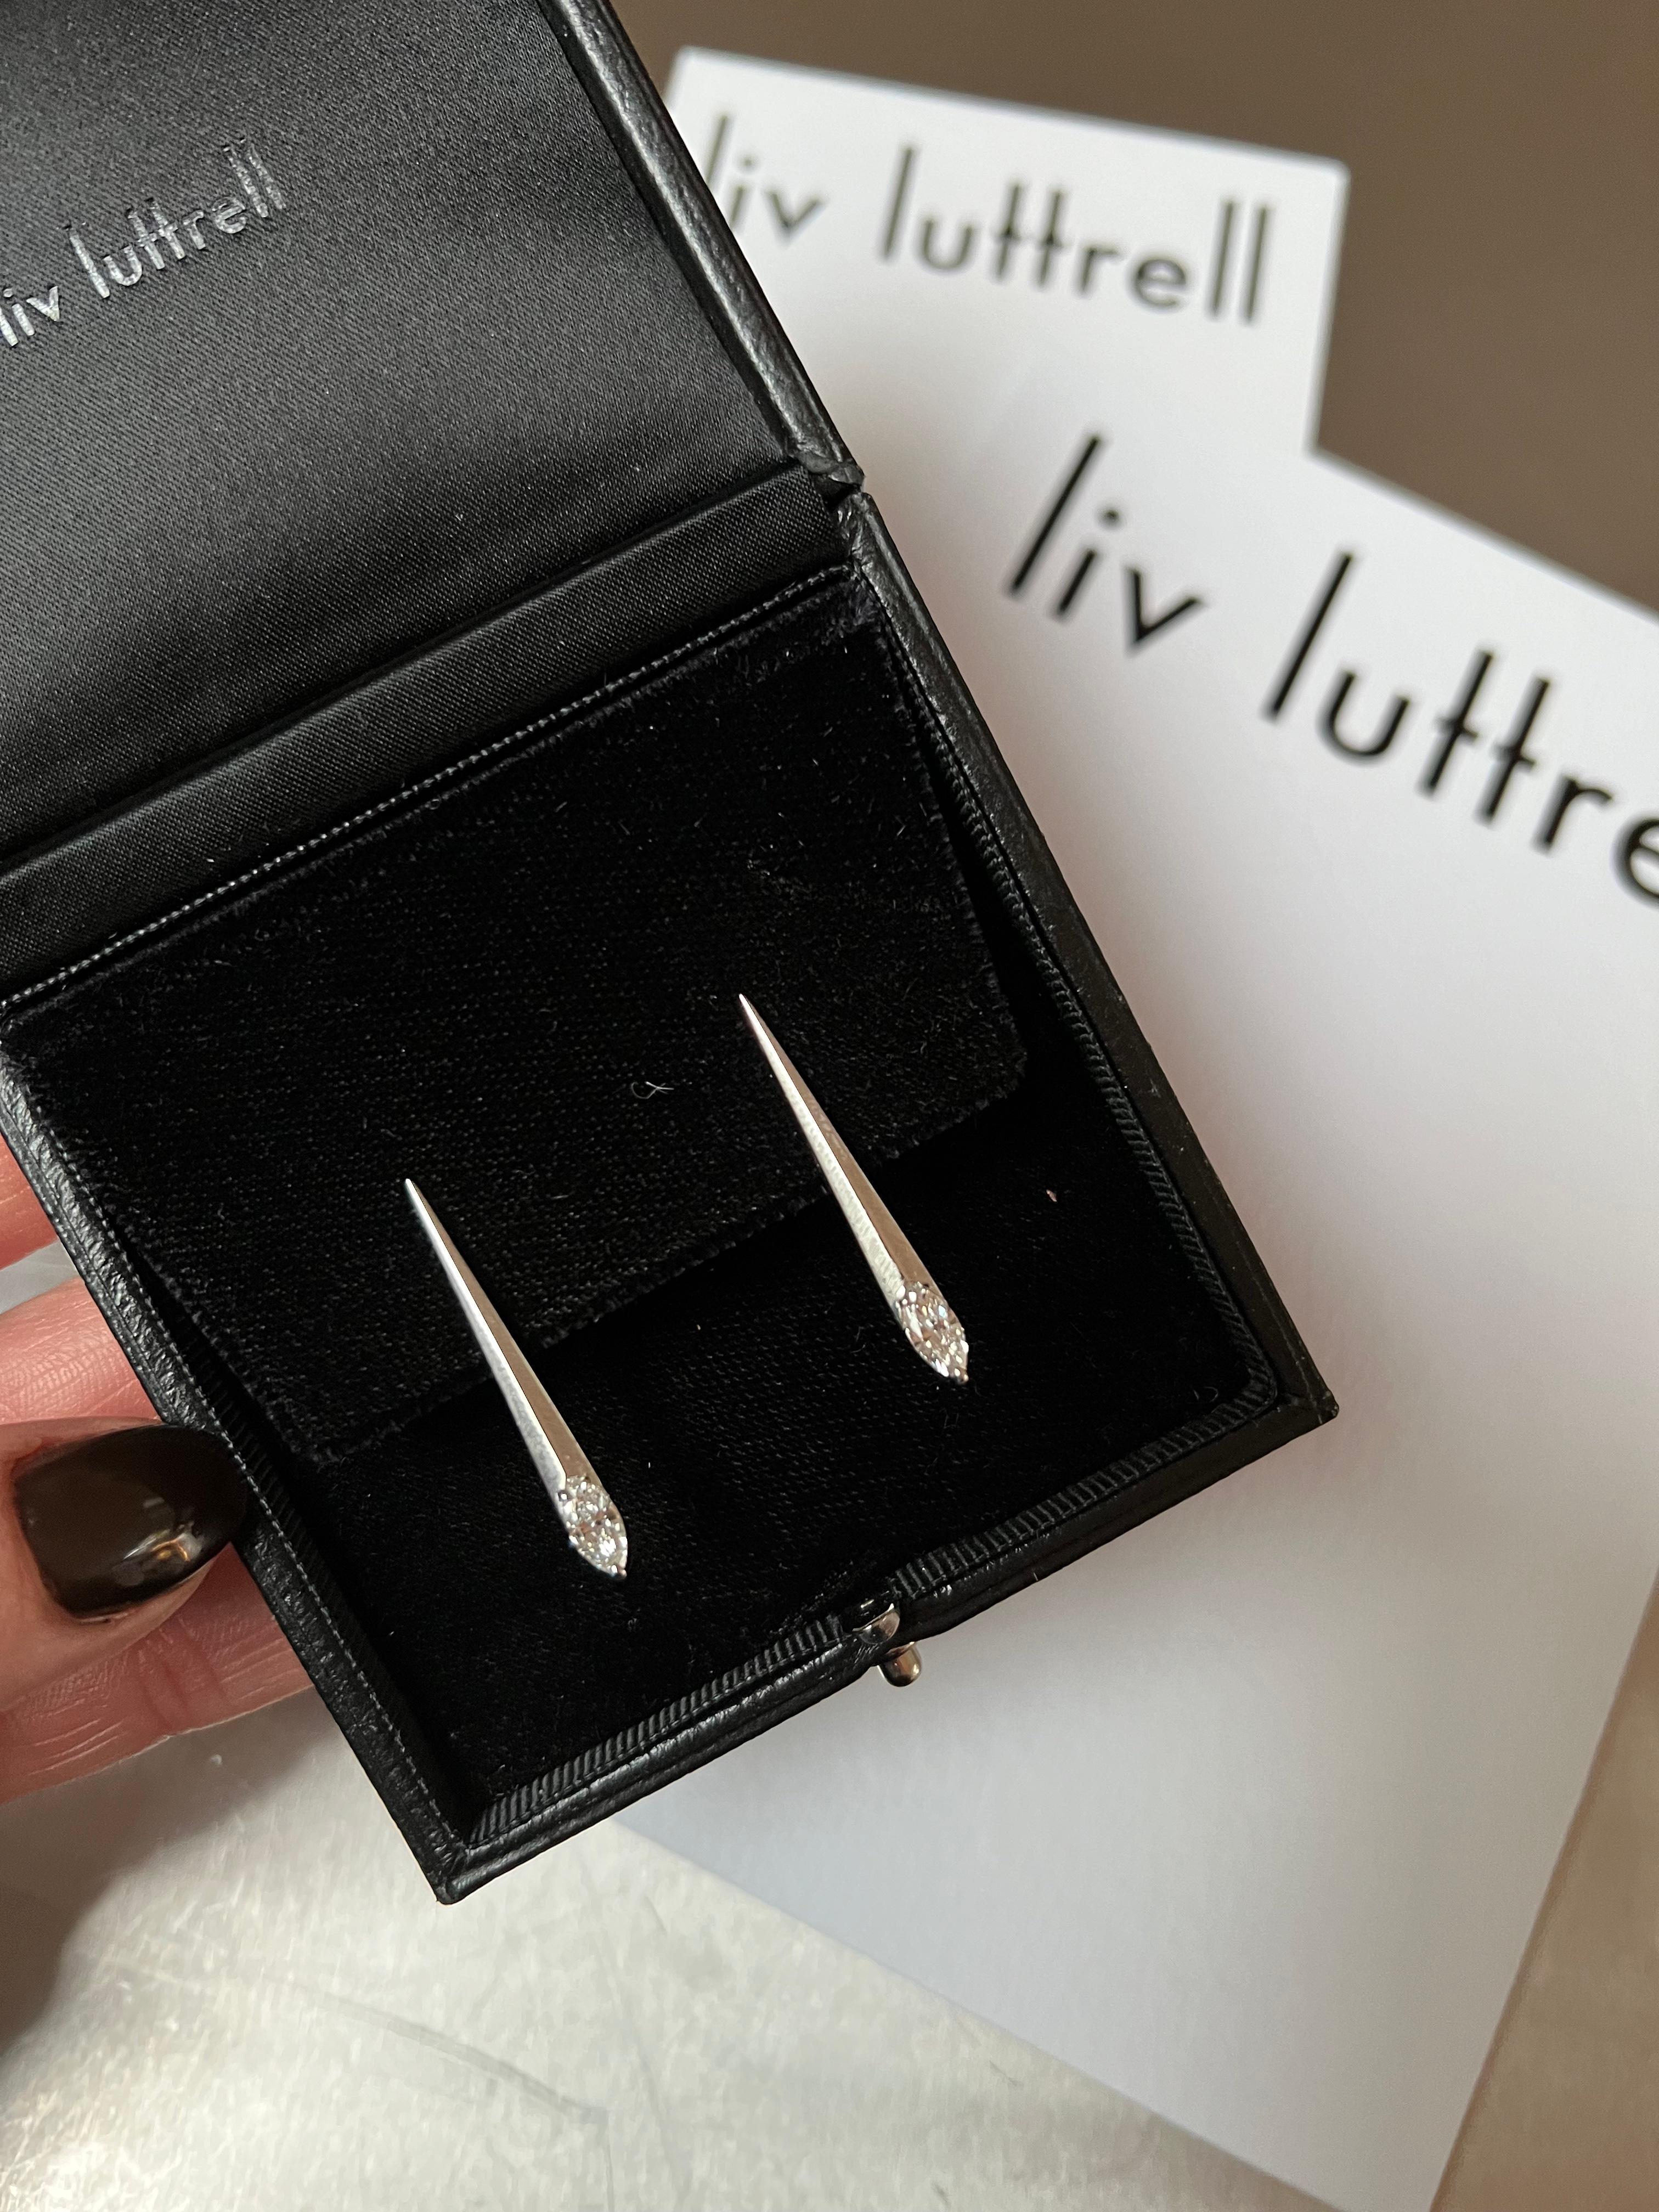 SPEAR TIP EARRINGS White gold with marquise-cut diamond by Liv Luttrell In New Condition For Sale In London, England